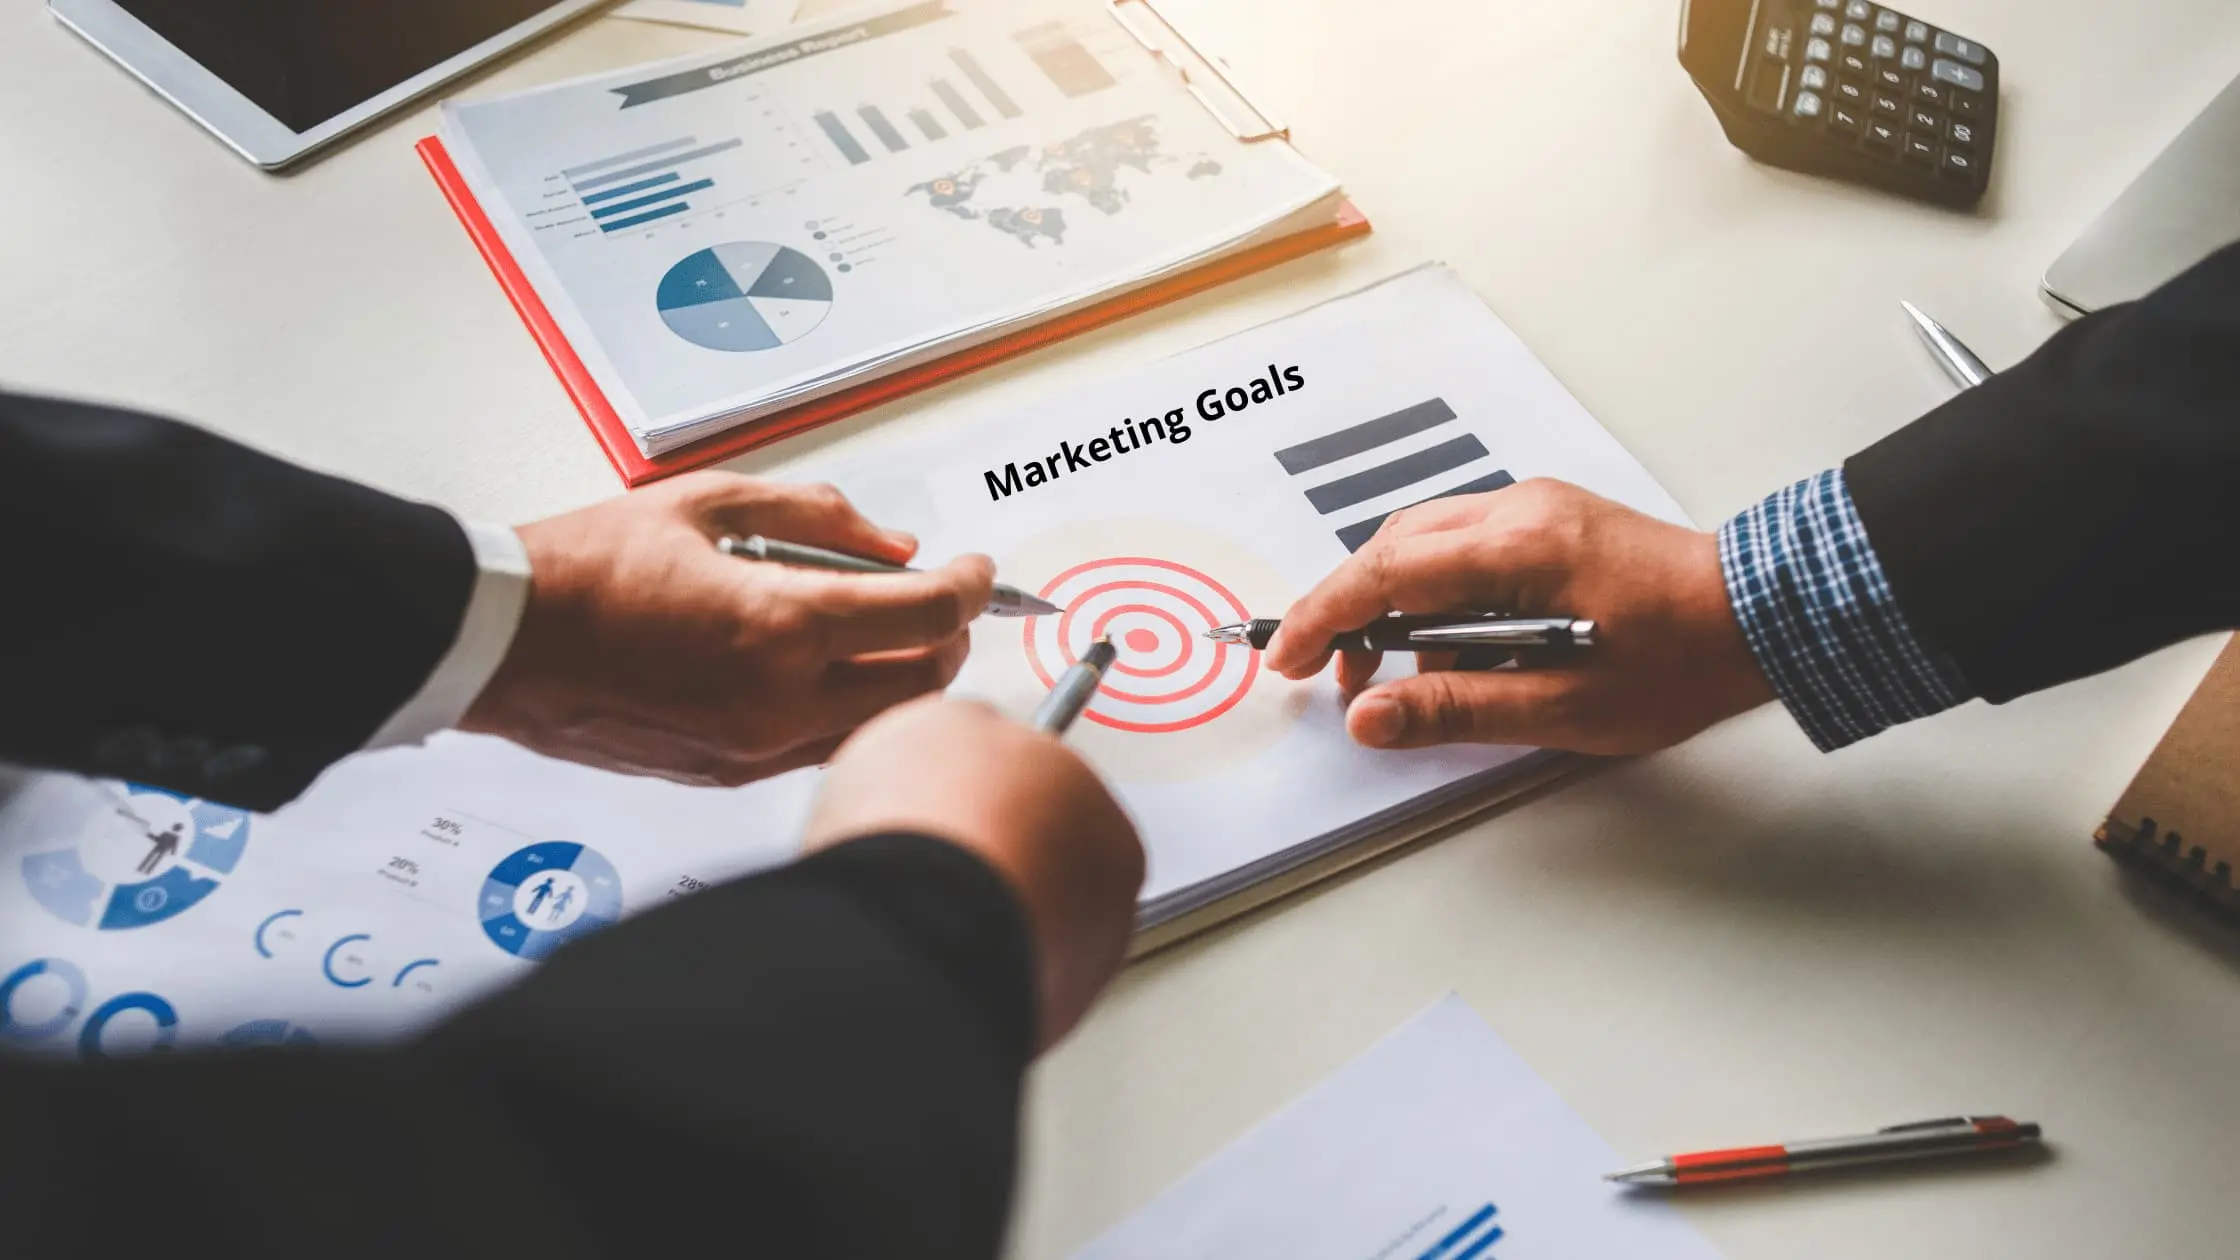 B2B marketing goals that can be achieved using paid marketing